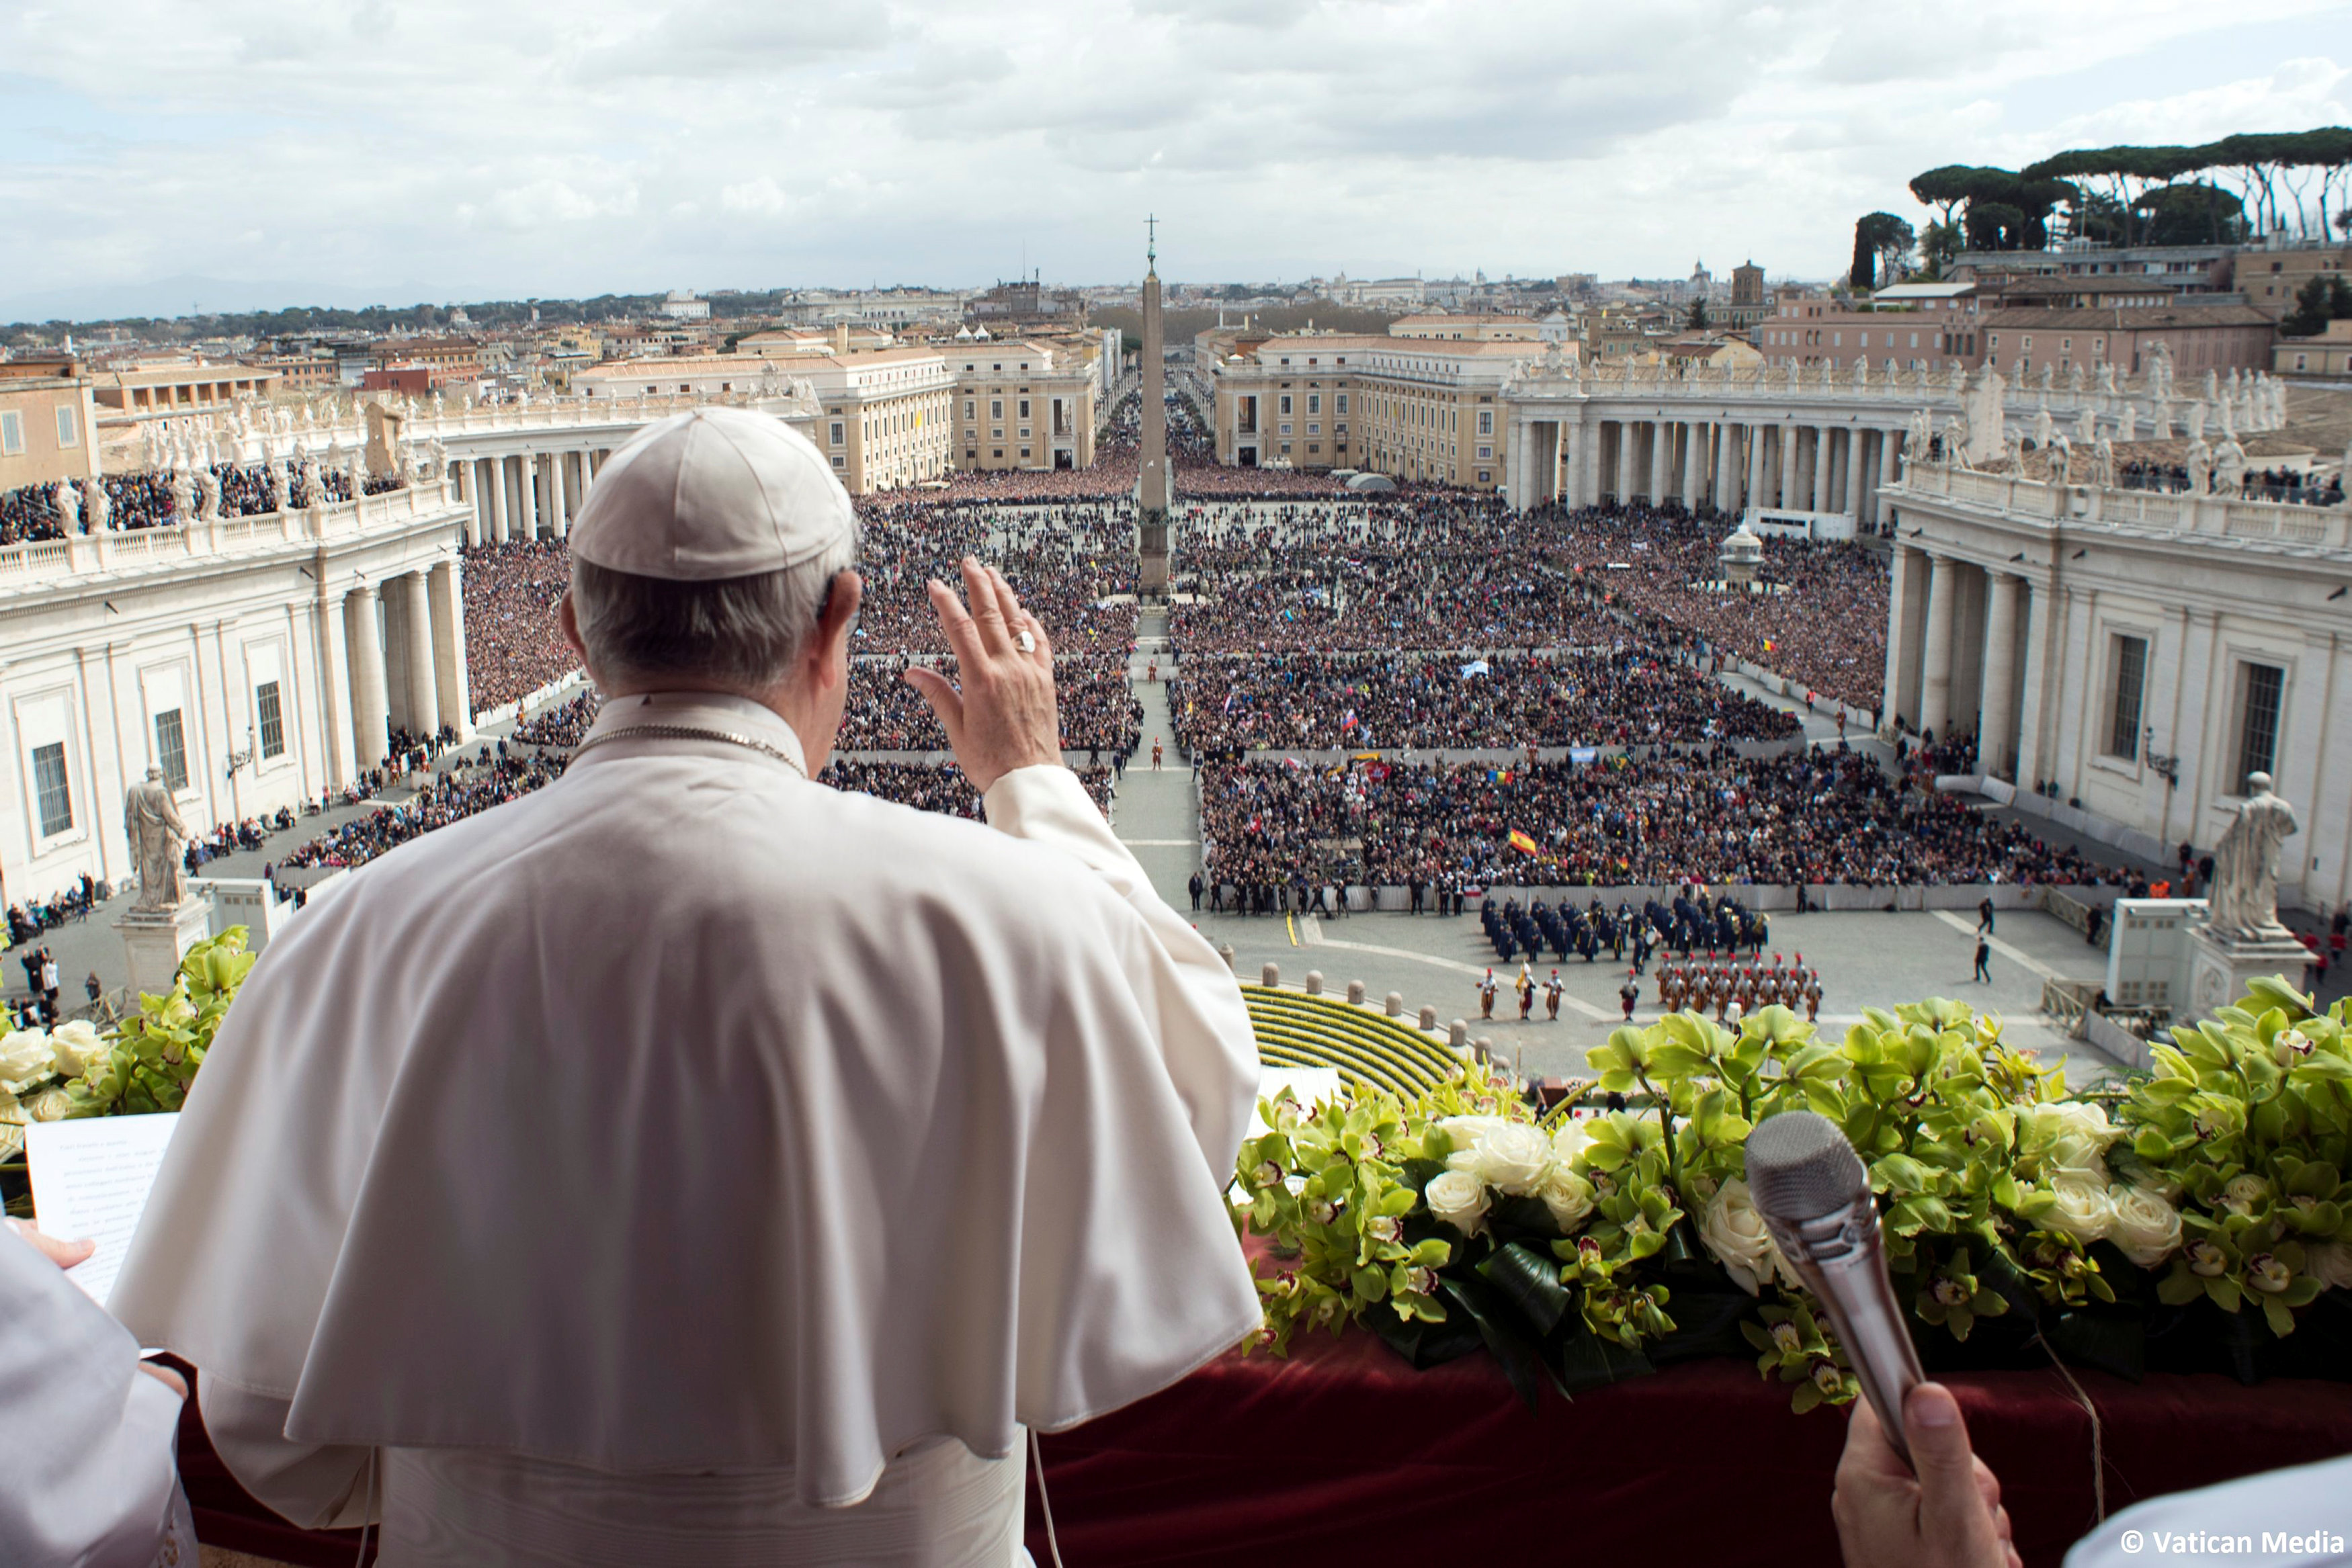 Pope Francis appears before delivering his Easter message in the Urbi et Orbi (to the City and the World) address from the balcony overlooking St. Peter's Square at the Vatican April 1, 2018.